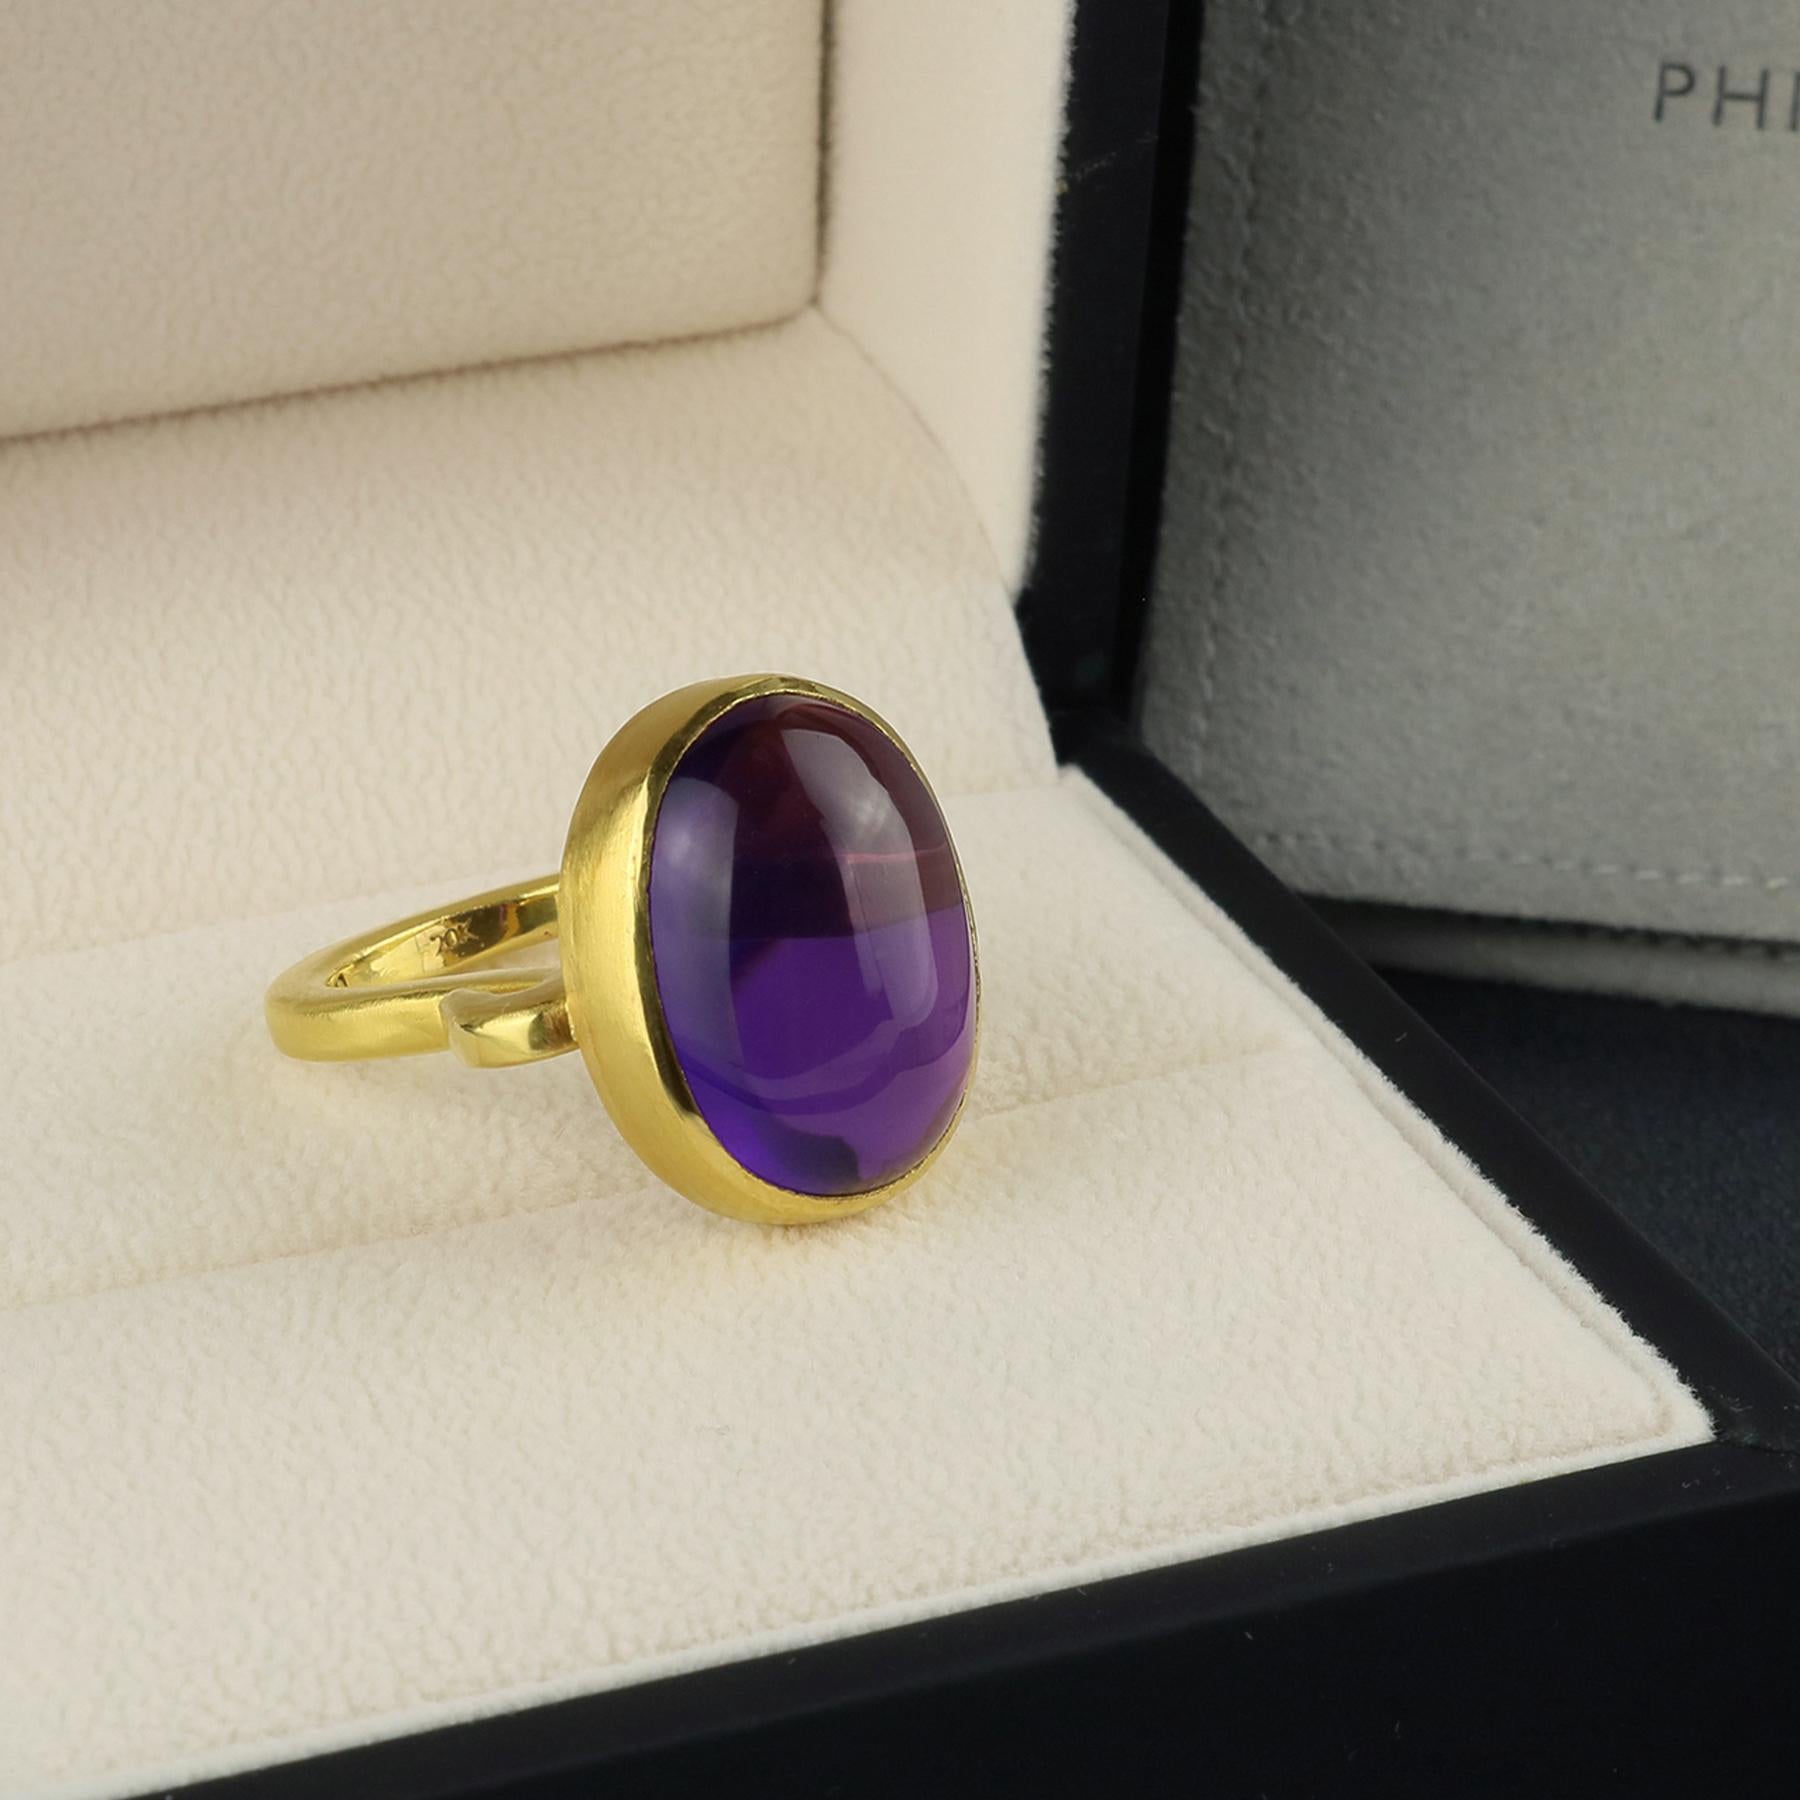 PHILIPPE SPENCER - 23.73 ct Cabochon Amethyst set in backless 22K Gold bezel with Hand-Forged Solid 20K Gold Swan Neck Statement Ring.  Size 6 to 6 1/2, and is in-stock and ready to ship. Our apologies in advance, this One-Of-A-Kind statement ring